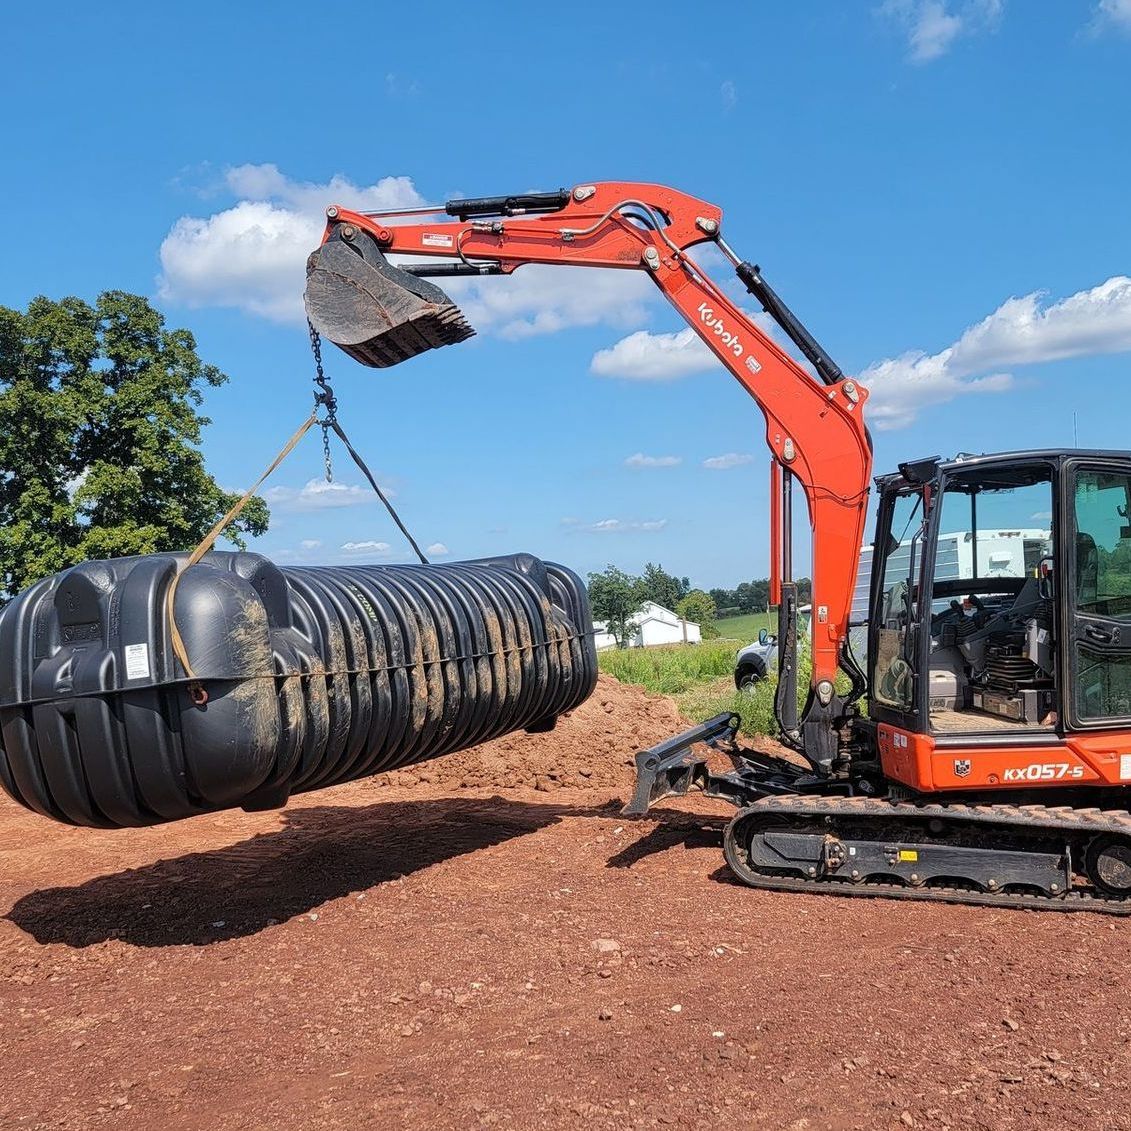 Sam's Backhoe & Septic Repairs | New septic system installation in Lancaster, York and Reading Pa